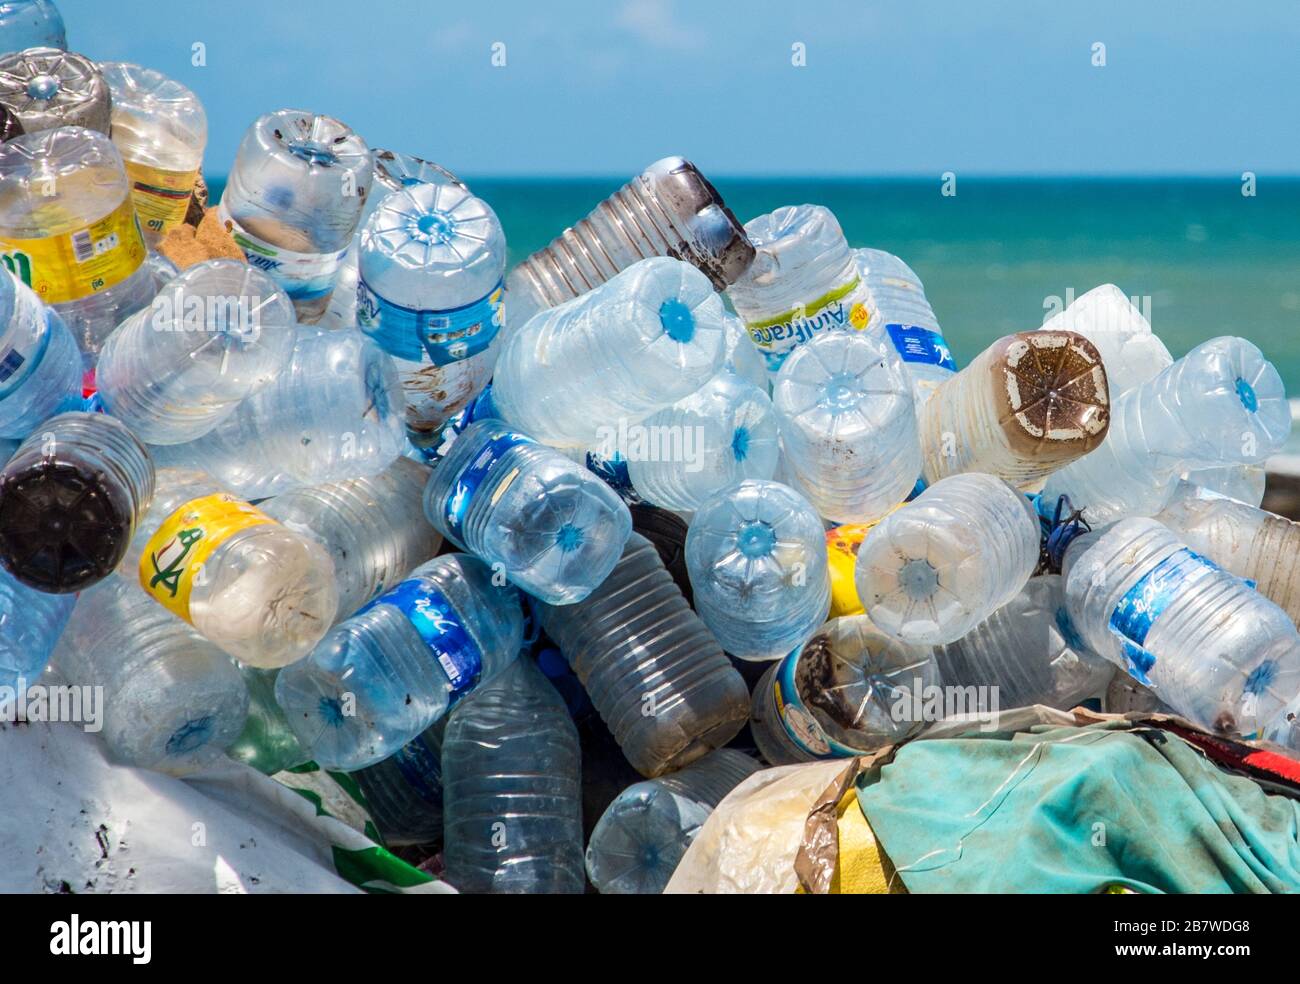 A pile of plastic water bottles on a Moroccan beach Stock Photo